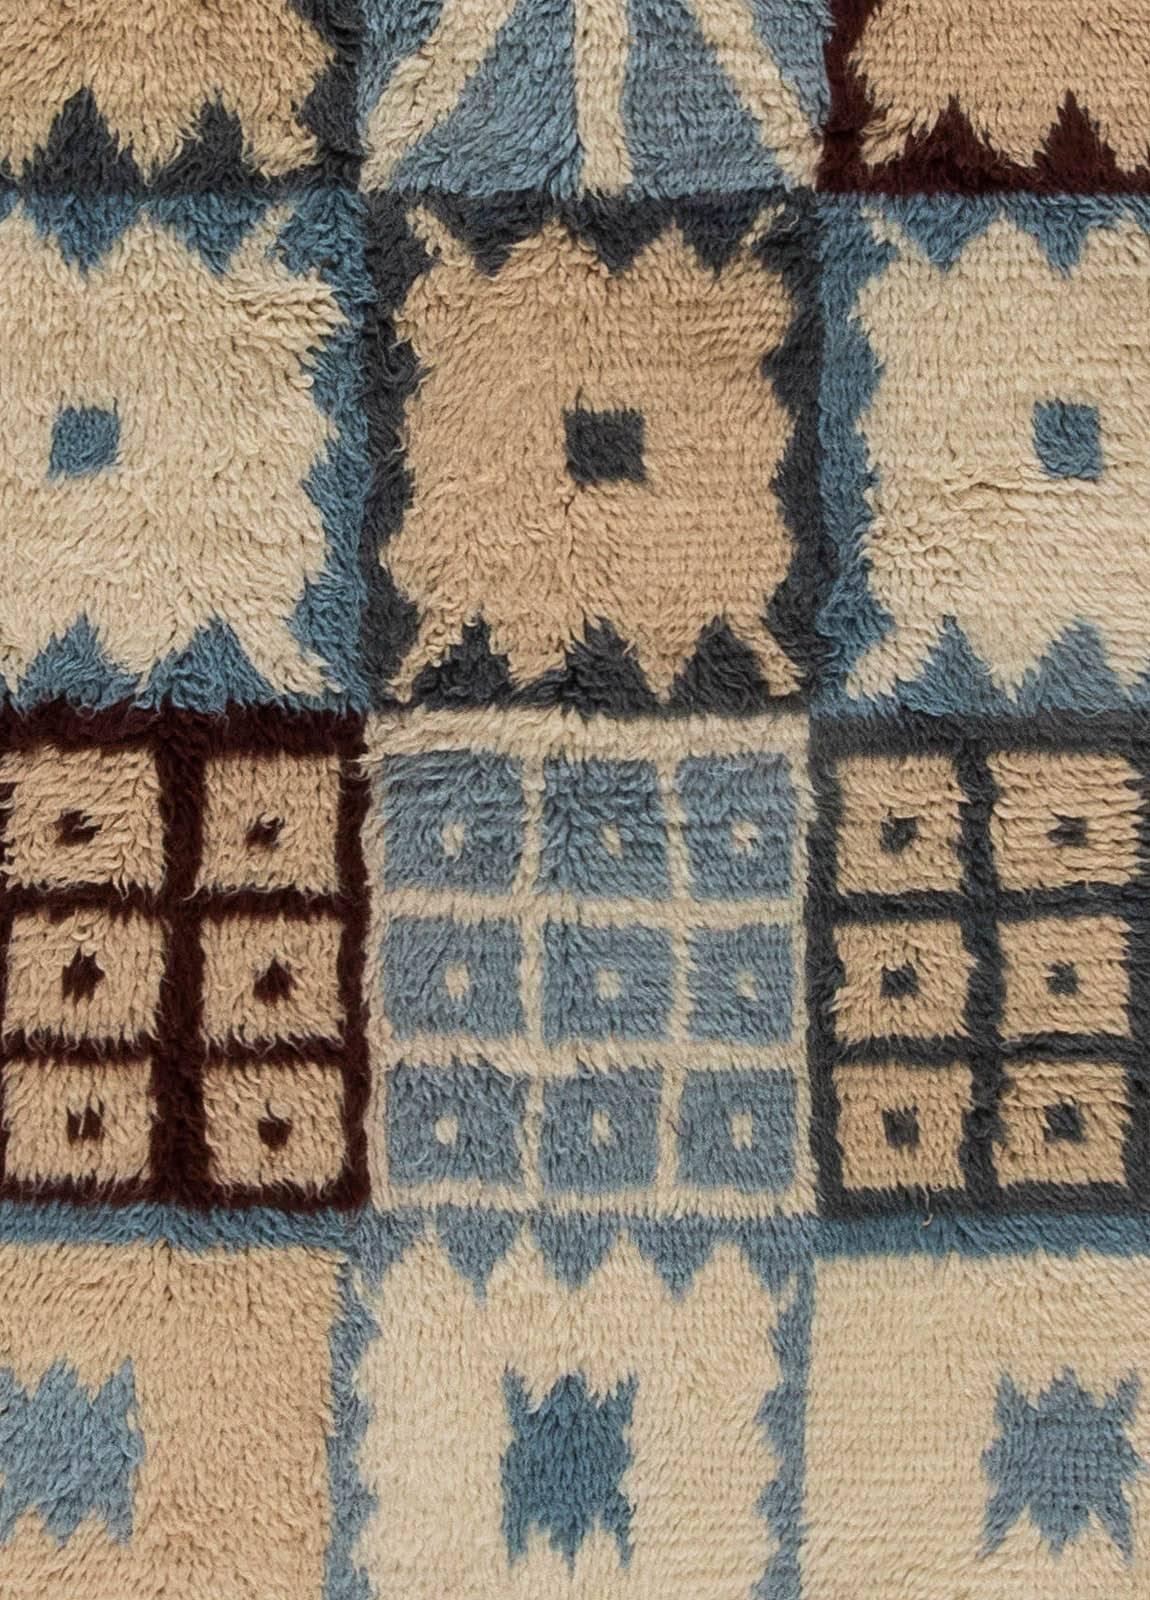 This Swedish inspired carpet contains the greatest features of its kind. Geometric design is both elegant and positive. Beautifully composed color palette, maintained in pastel shades of beige, light blue, off-white and brown.